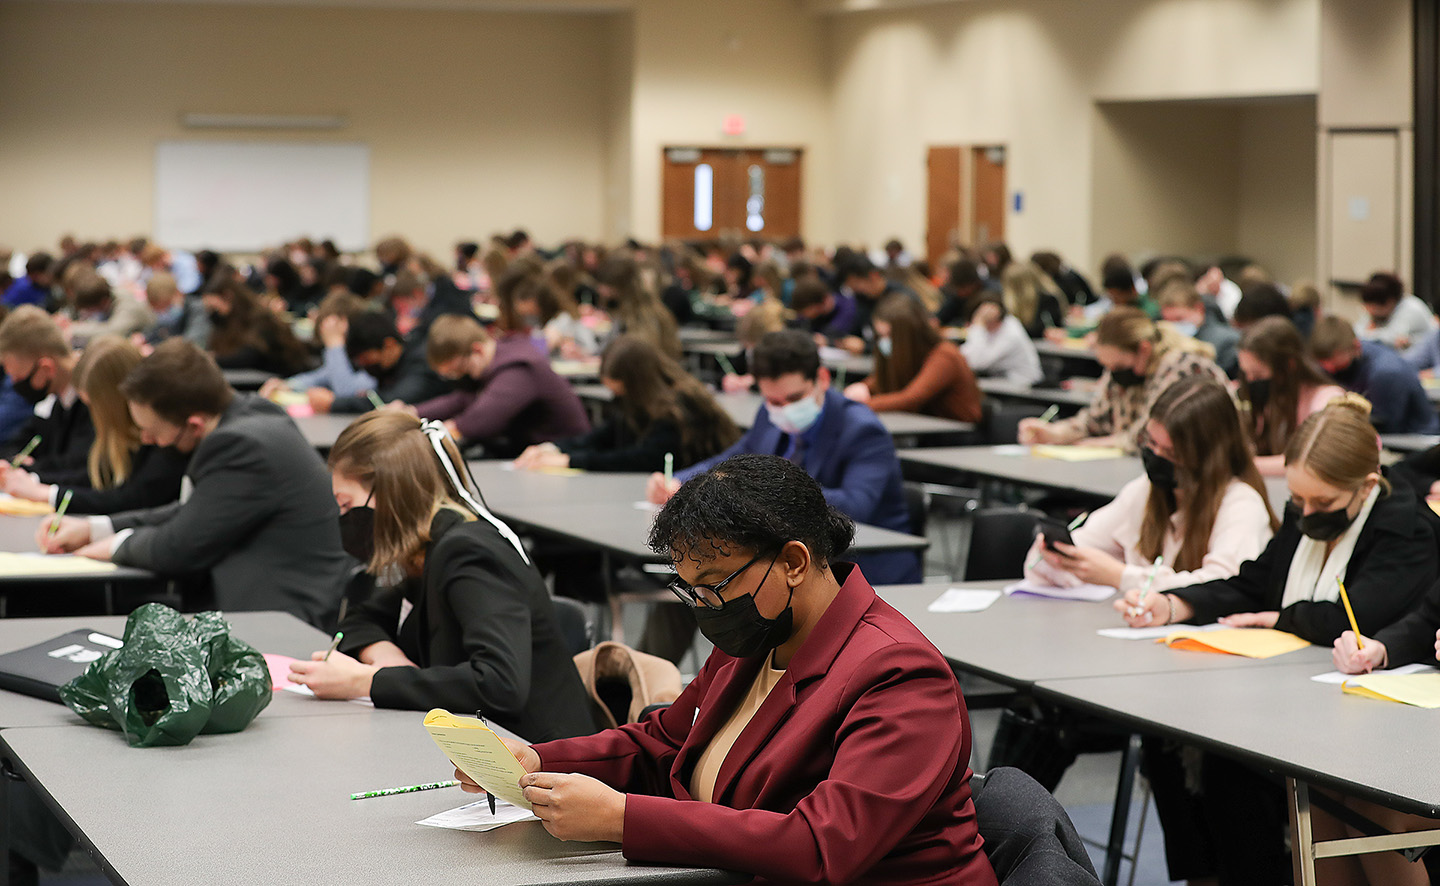 The Loper Business Invitational brought nearly 250 students from 24 schools to UNK in February to network, develop their job interview skills and test their knowledge in a variety of business-related areas.